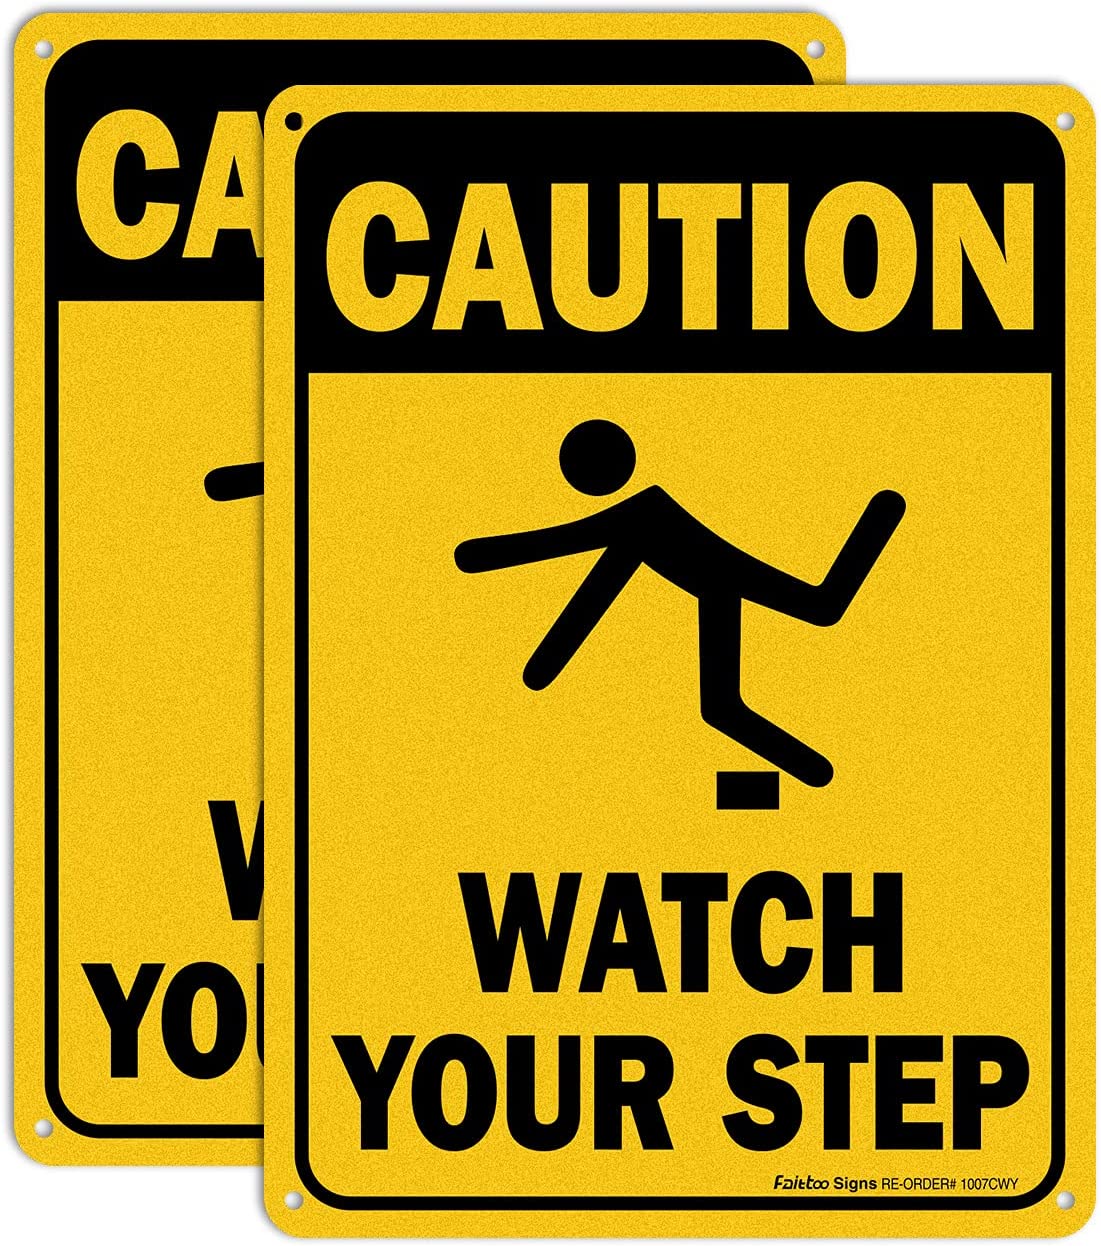 Caution Watch Your Step Sign, Safety Sign, 10 x 7 Inches rectangle, .040 Rust Free Aluminum, UV Protected and Waterproof, Weather Resistant, Durable Ink, Easy to Mount